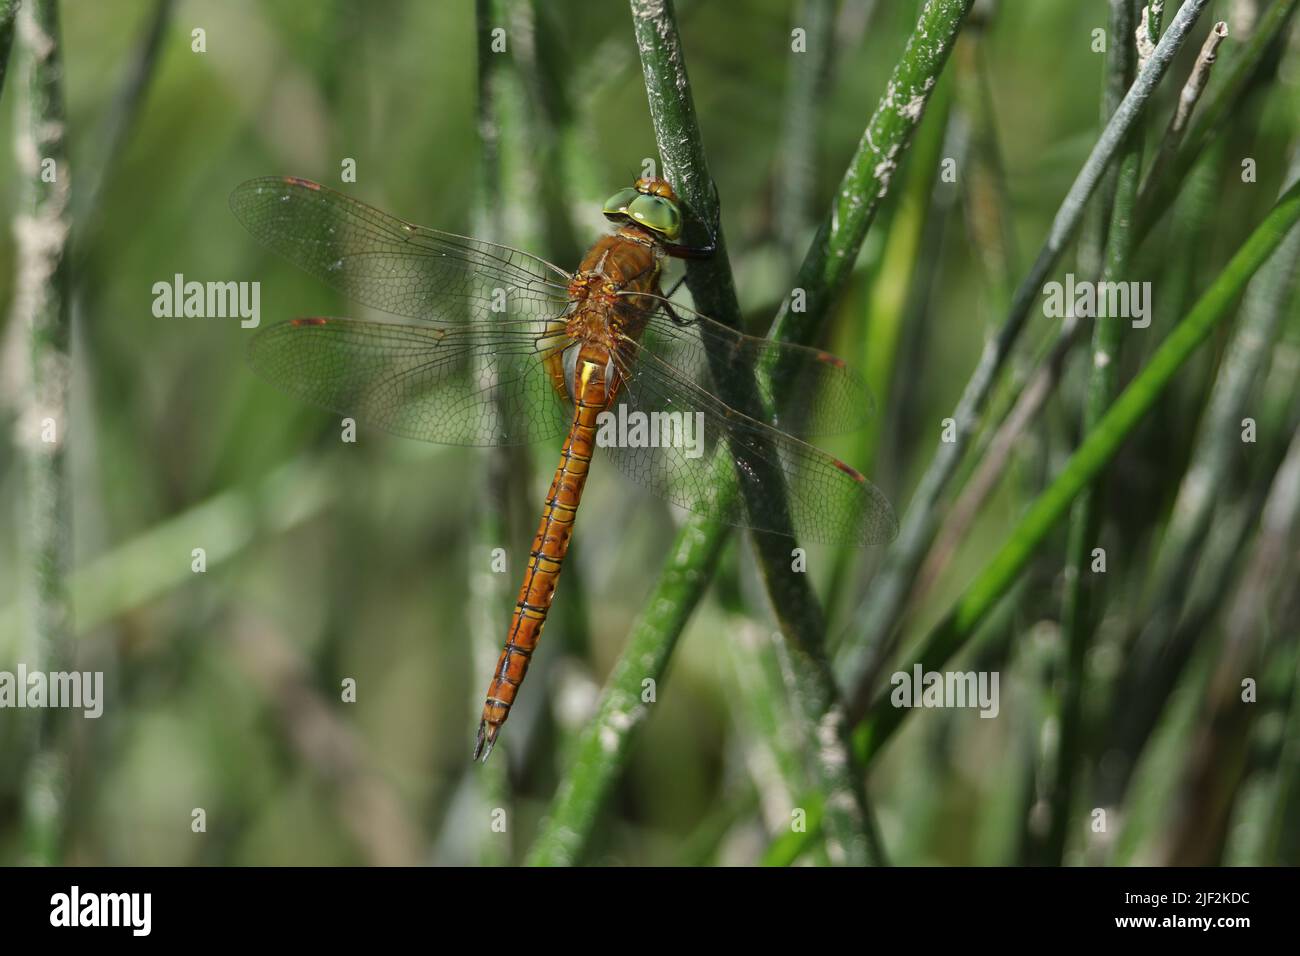 A beautiful Norfolk Hawker Dragonfly, Anaciaeschna isoceles, perching on a reed at the edge of a lake. Stock Photo